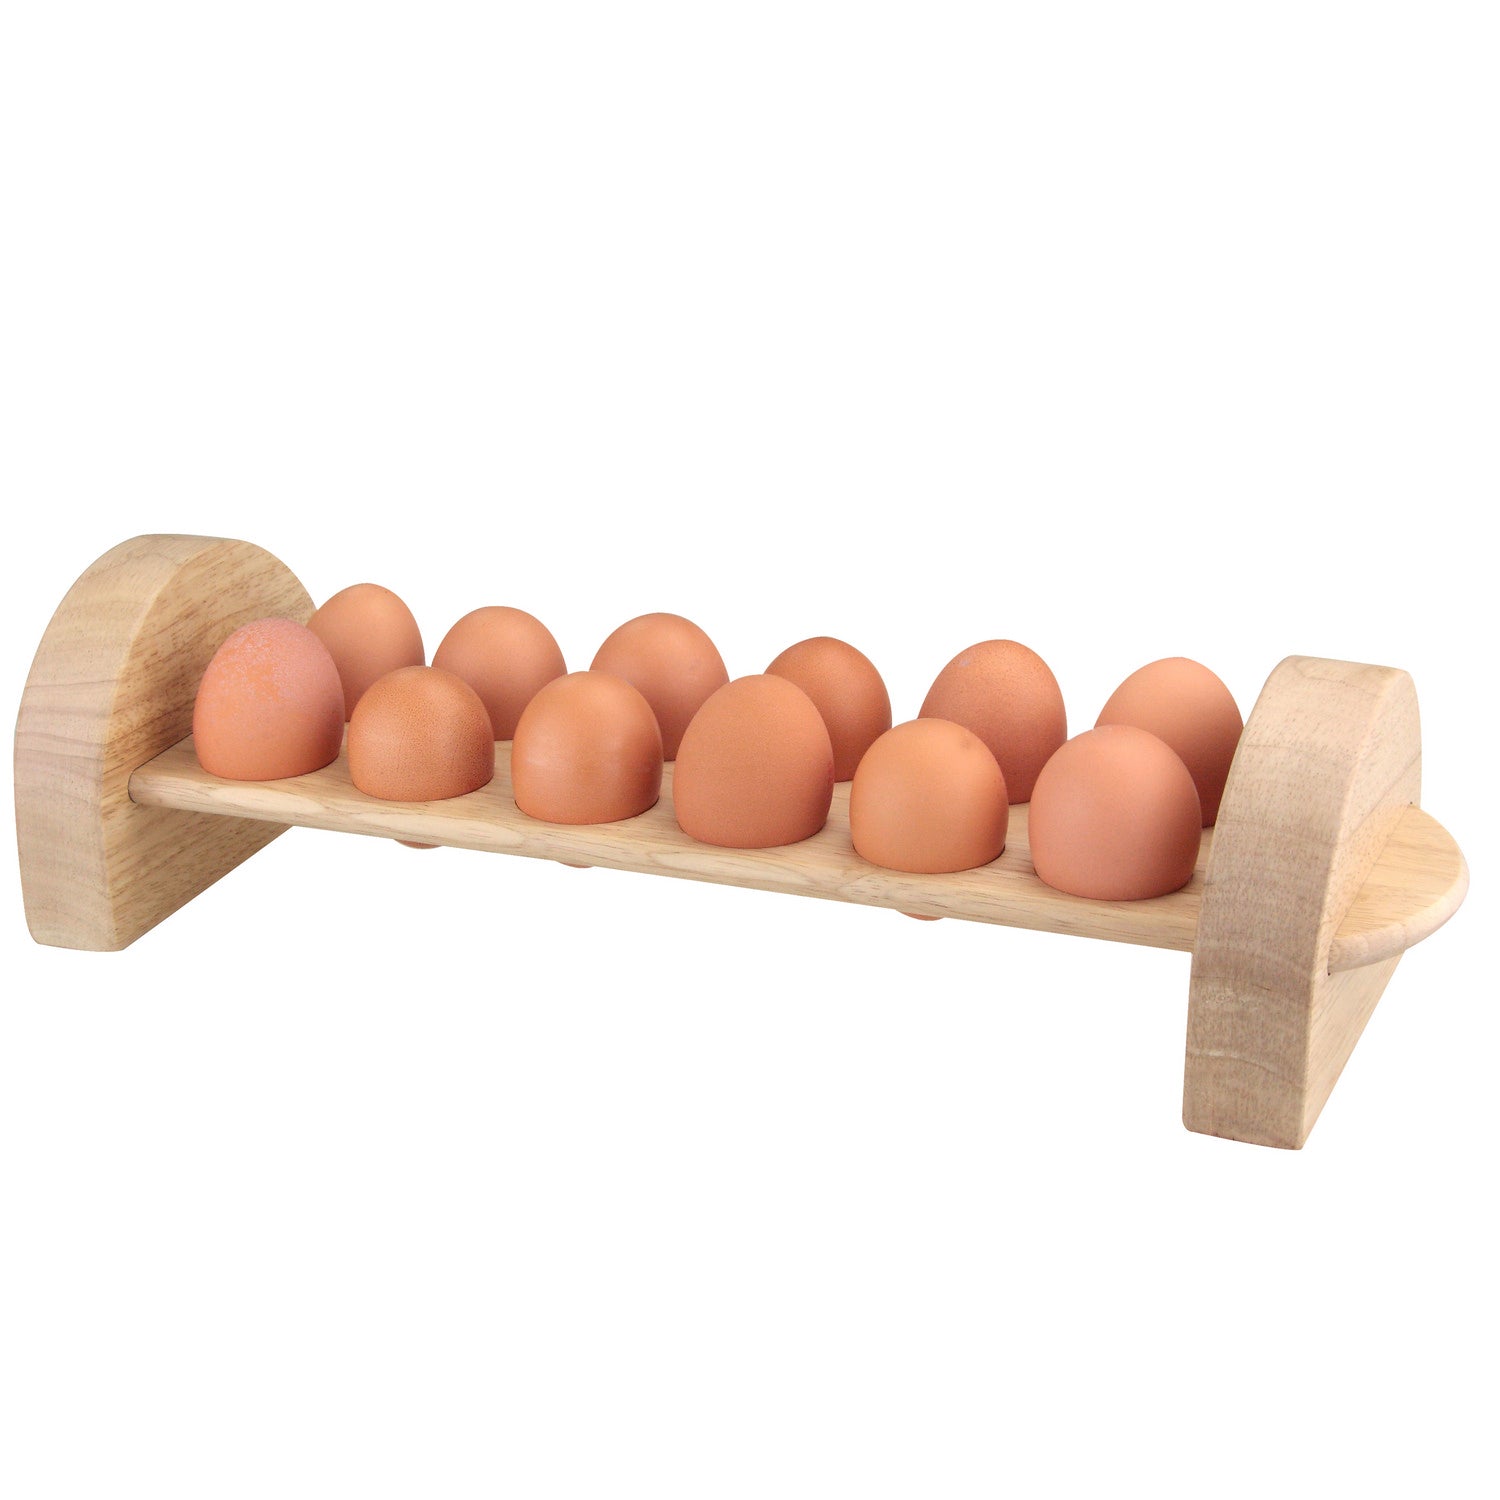 Rubberwood Wooden 12 Egg Rack Display Holder Container